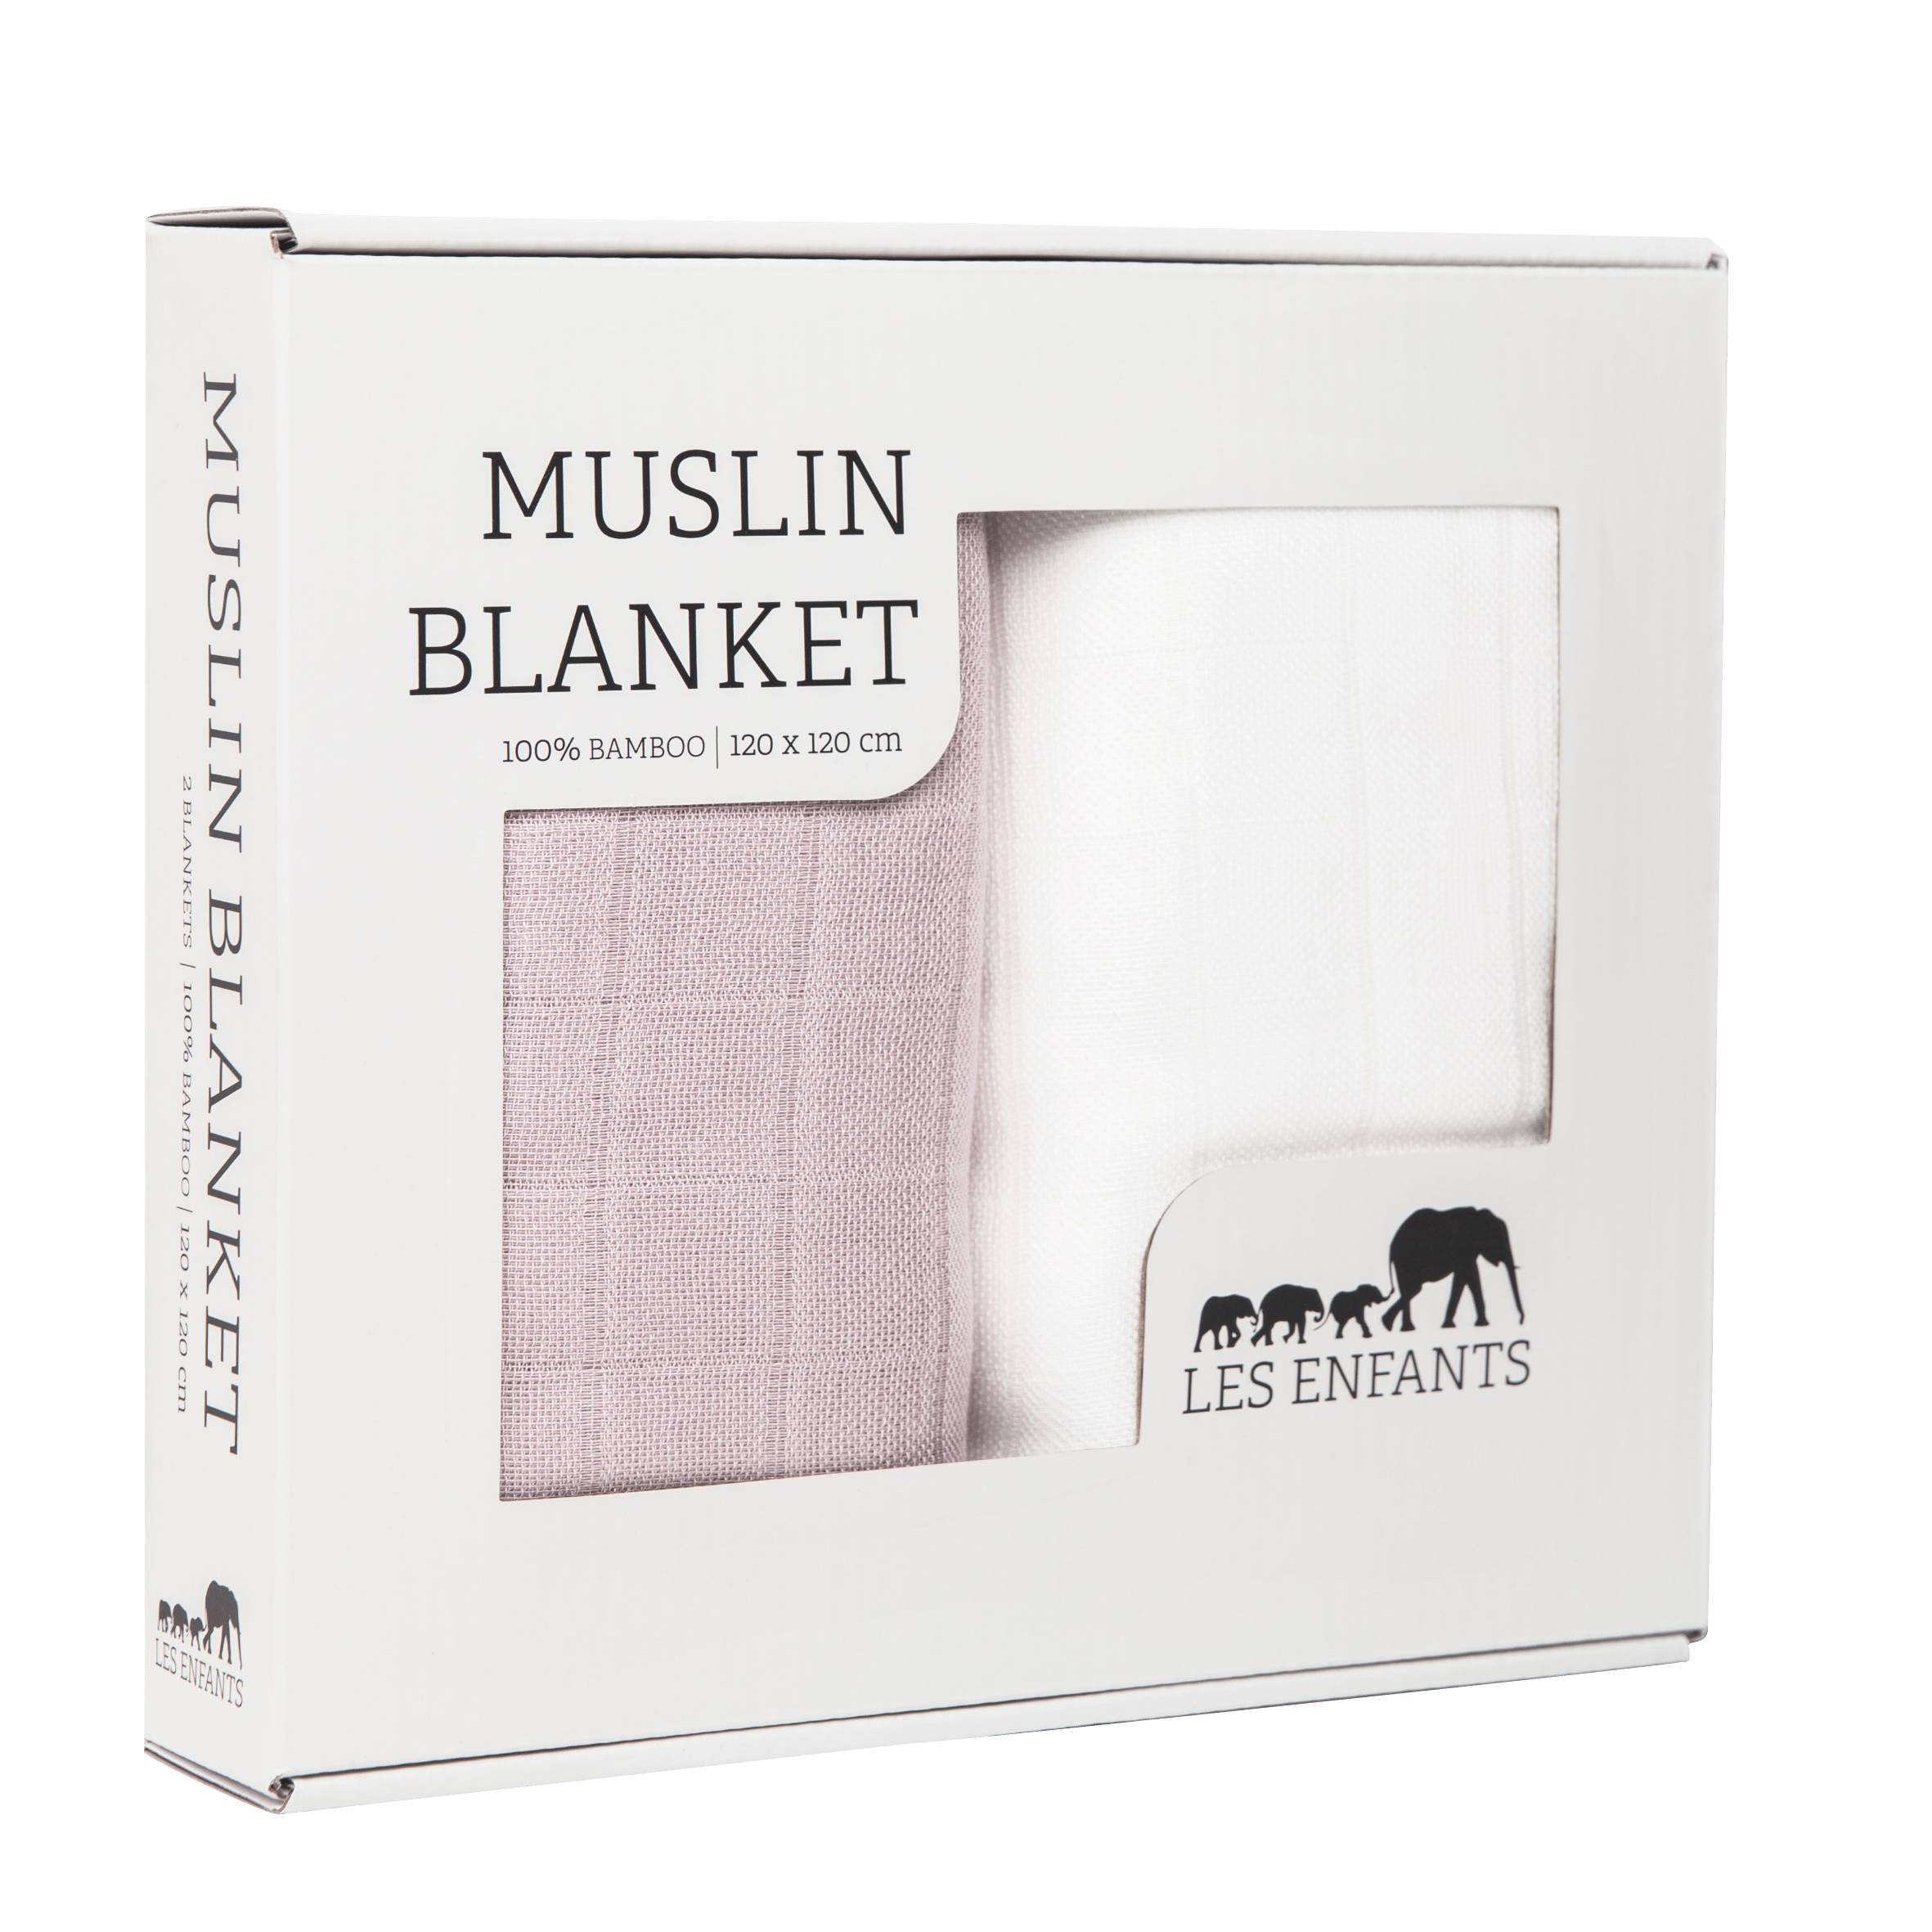 les enfants 100% bamboo mulisn blanket set pink and white in a presentation box